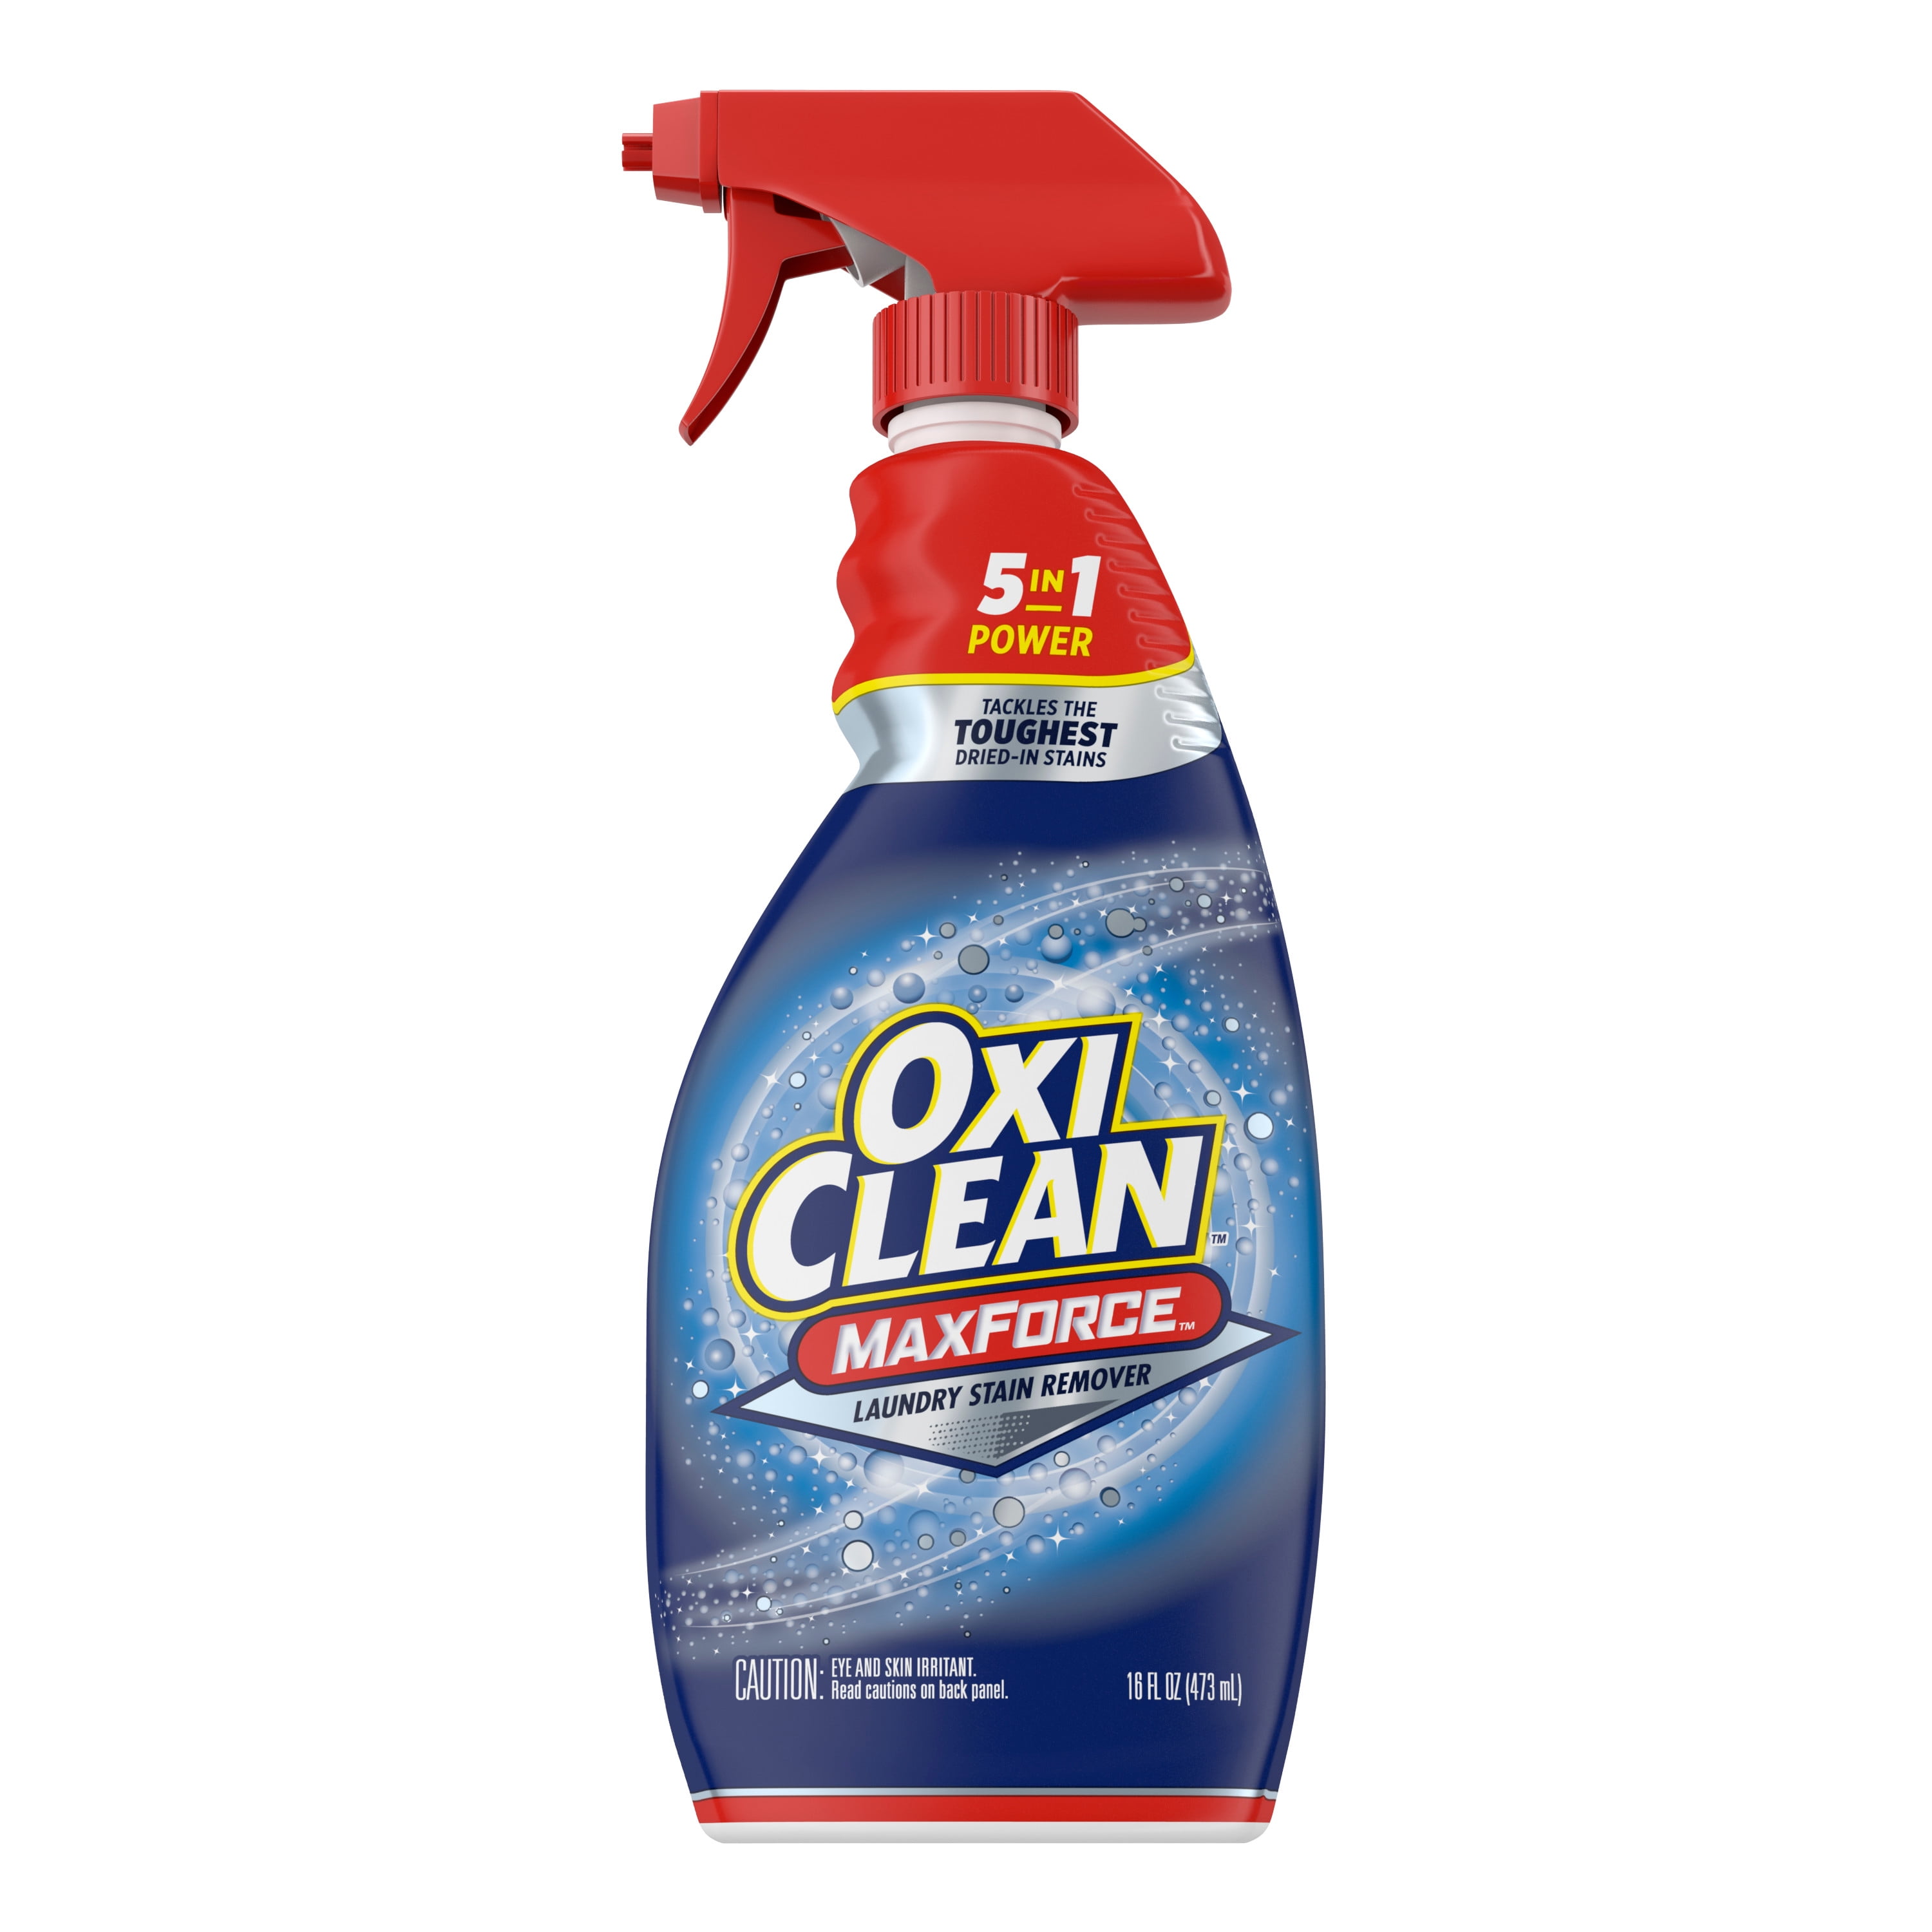 OxiClean MaxForce Laundry Stain Remover Spray, 5 in 1 Power Clothing Stain Remover, 16 Fl Oz